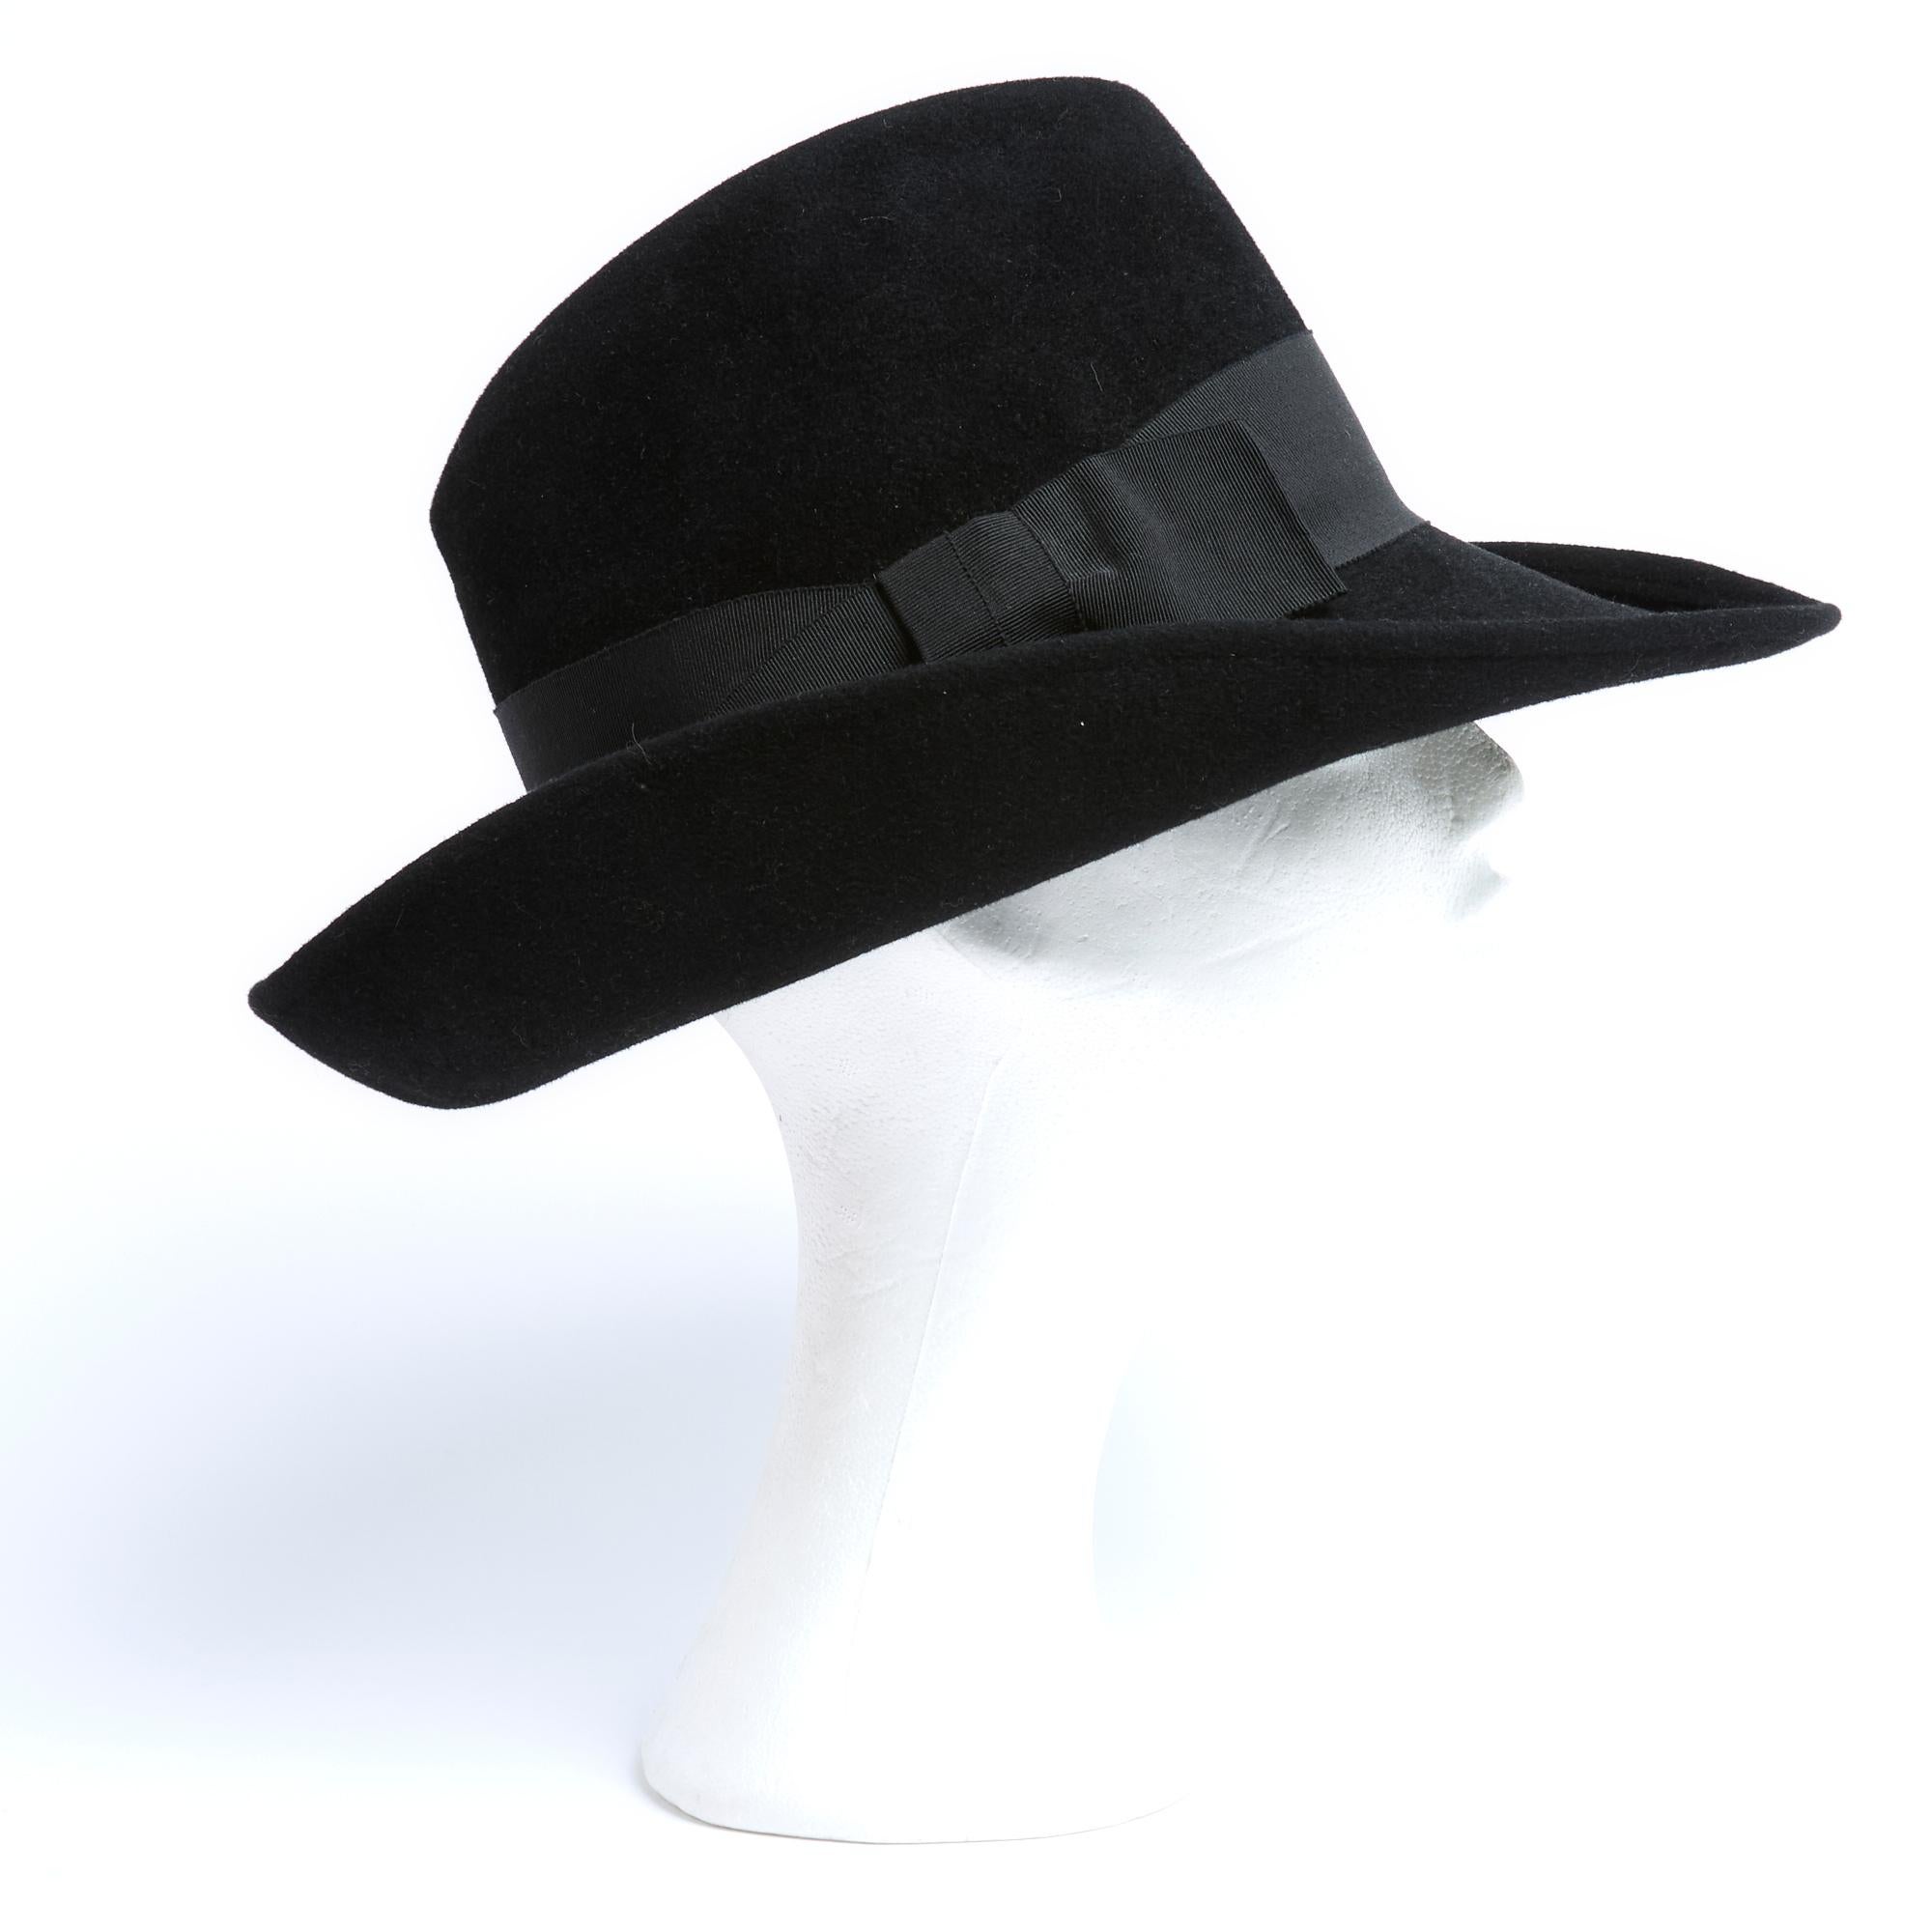 Marie Mercié oversized Fedora style, slightly asymmetrical hat in black wool felt, with wide brims, ribbon and bow in coordinated grosgrain braid. No size label but the fittings indicate an L or head circumference 58 cm. The hat is in very good